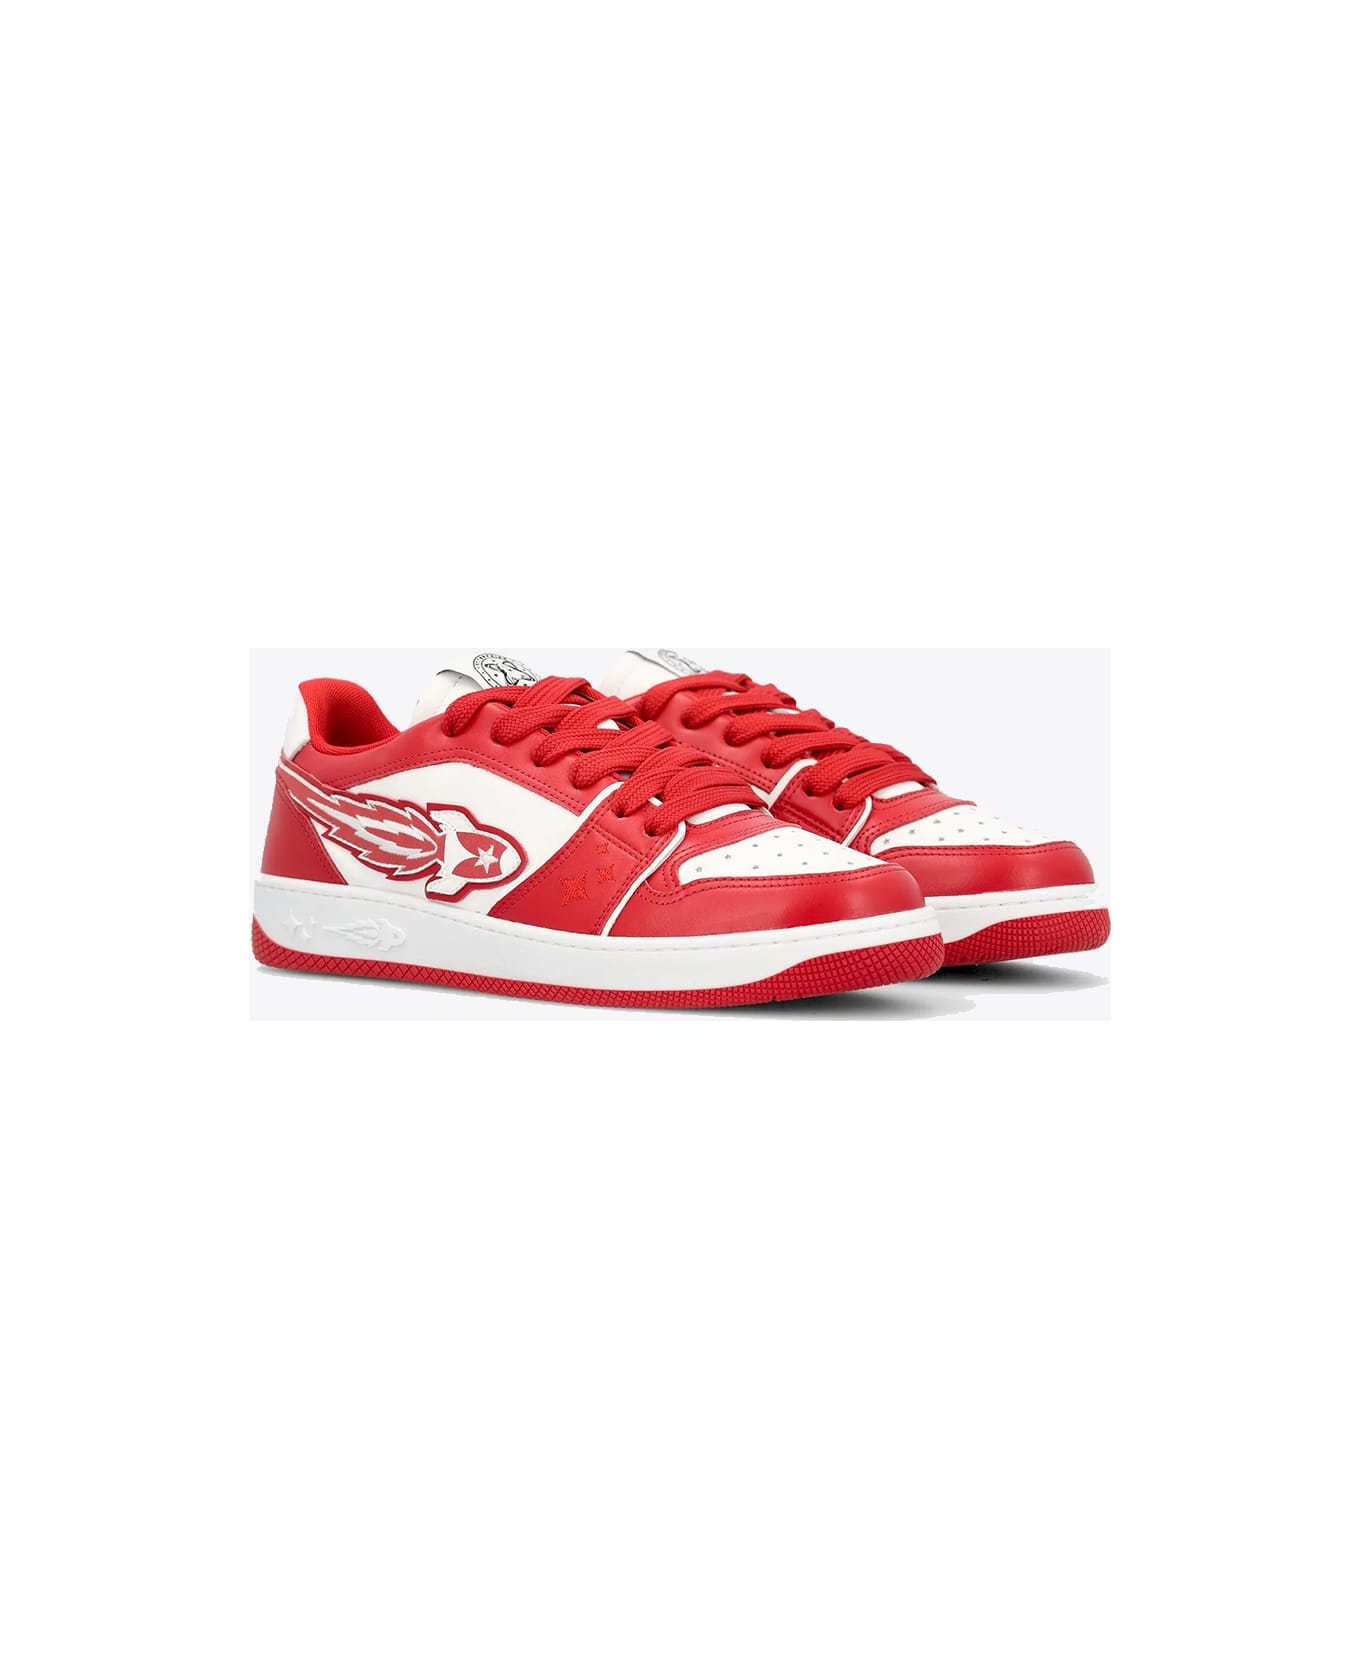 Enterprise Japan Ej Egg Rocket M - Low Sn C.o. Calf Red and white low sneaker with rocket logo. - Rosso/bianco